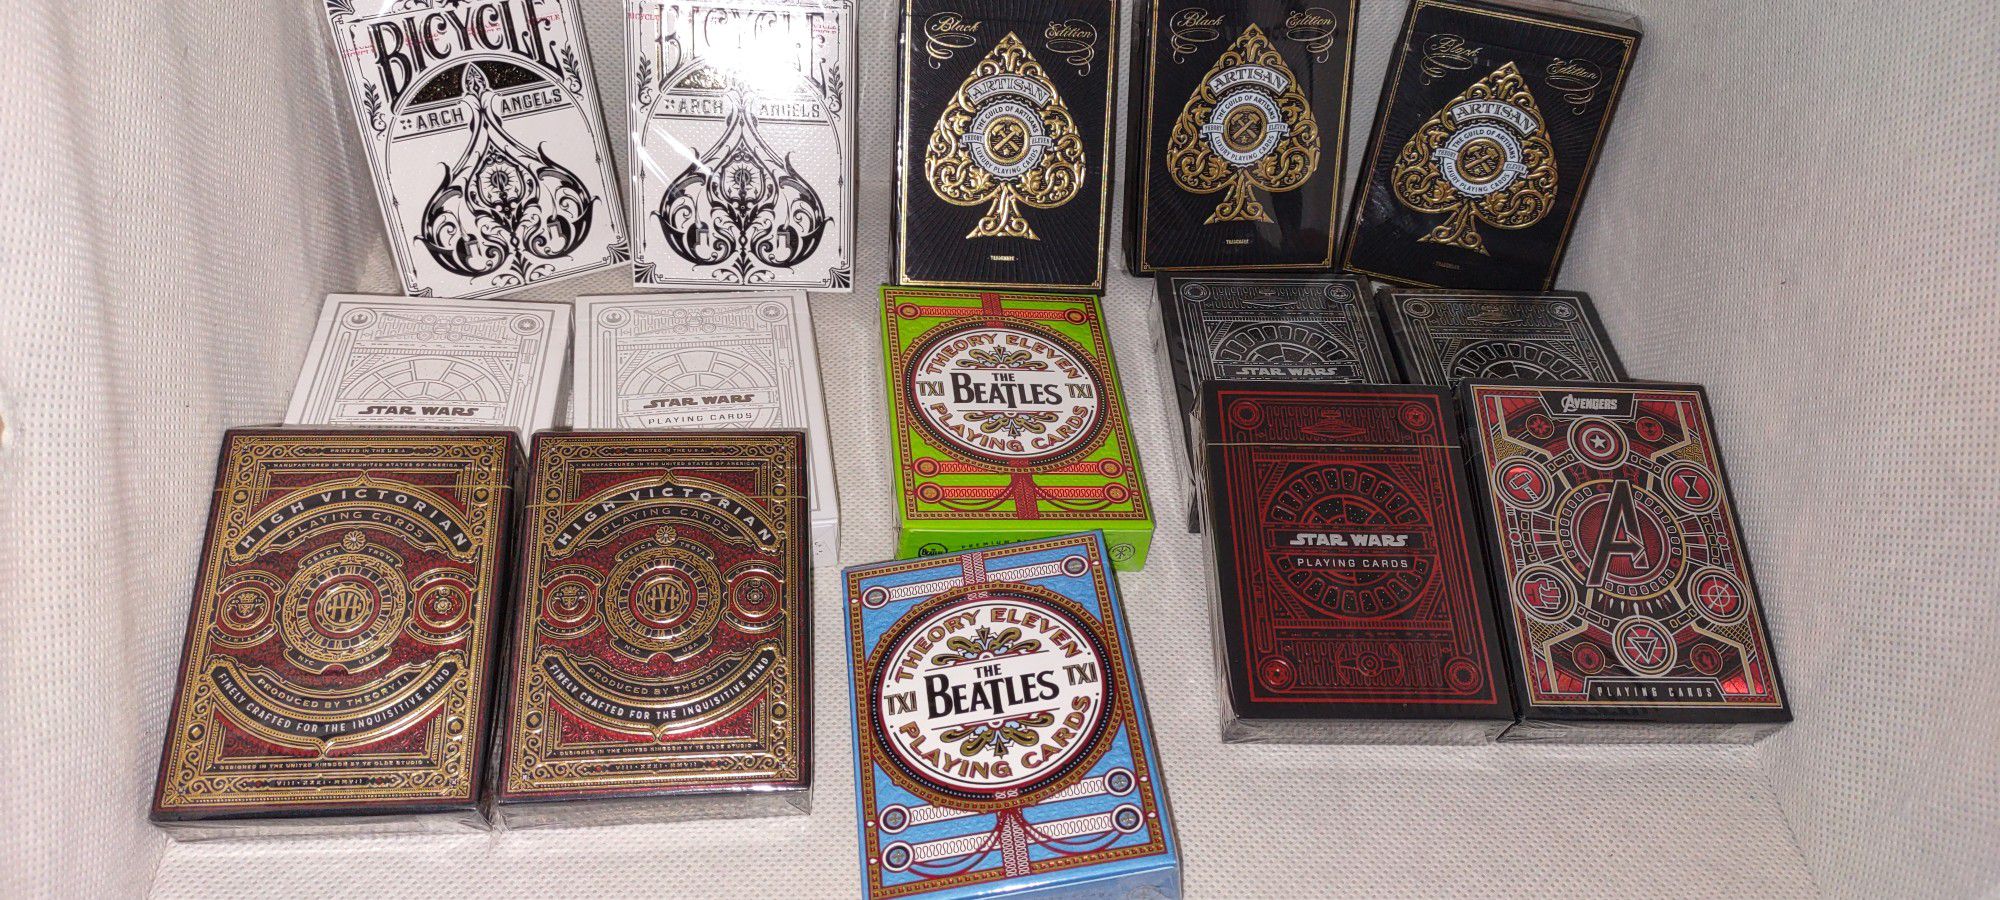 Lot of 15 Decks of Mixed Theory 11 Bicycle Playing Cards